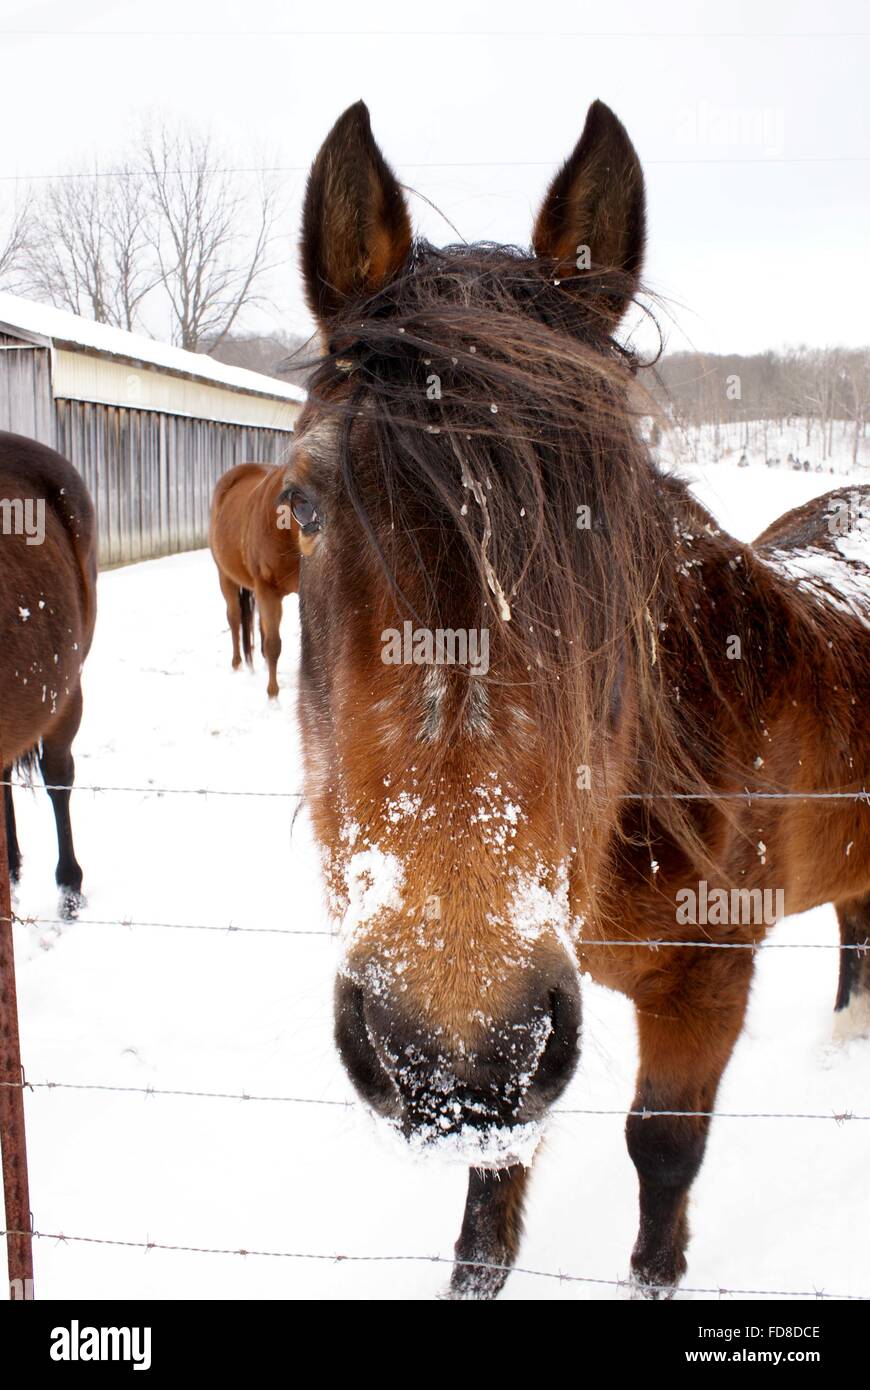 Horse with snow on its face. Stock Photo